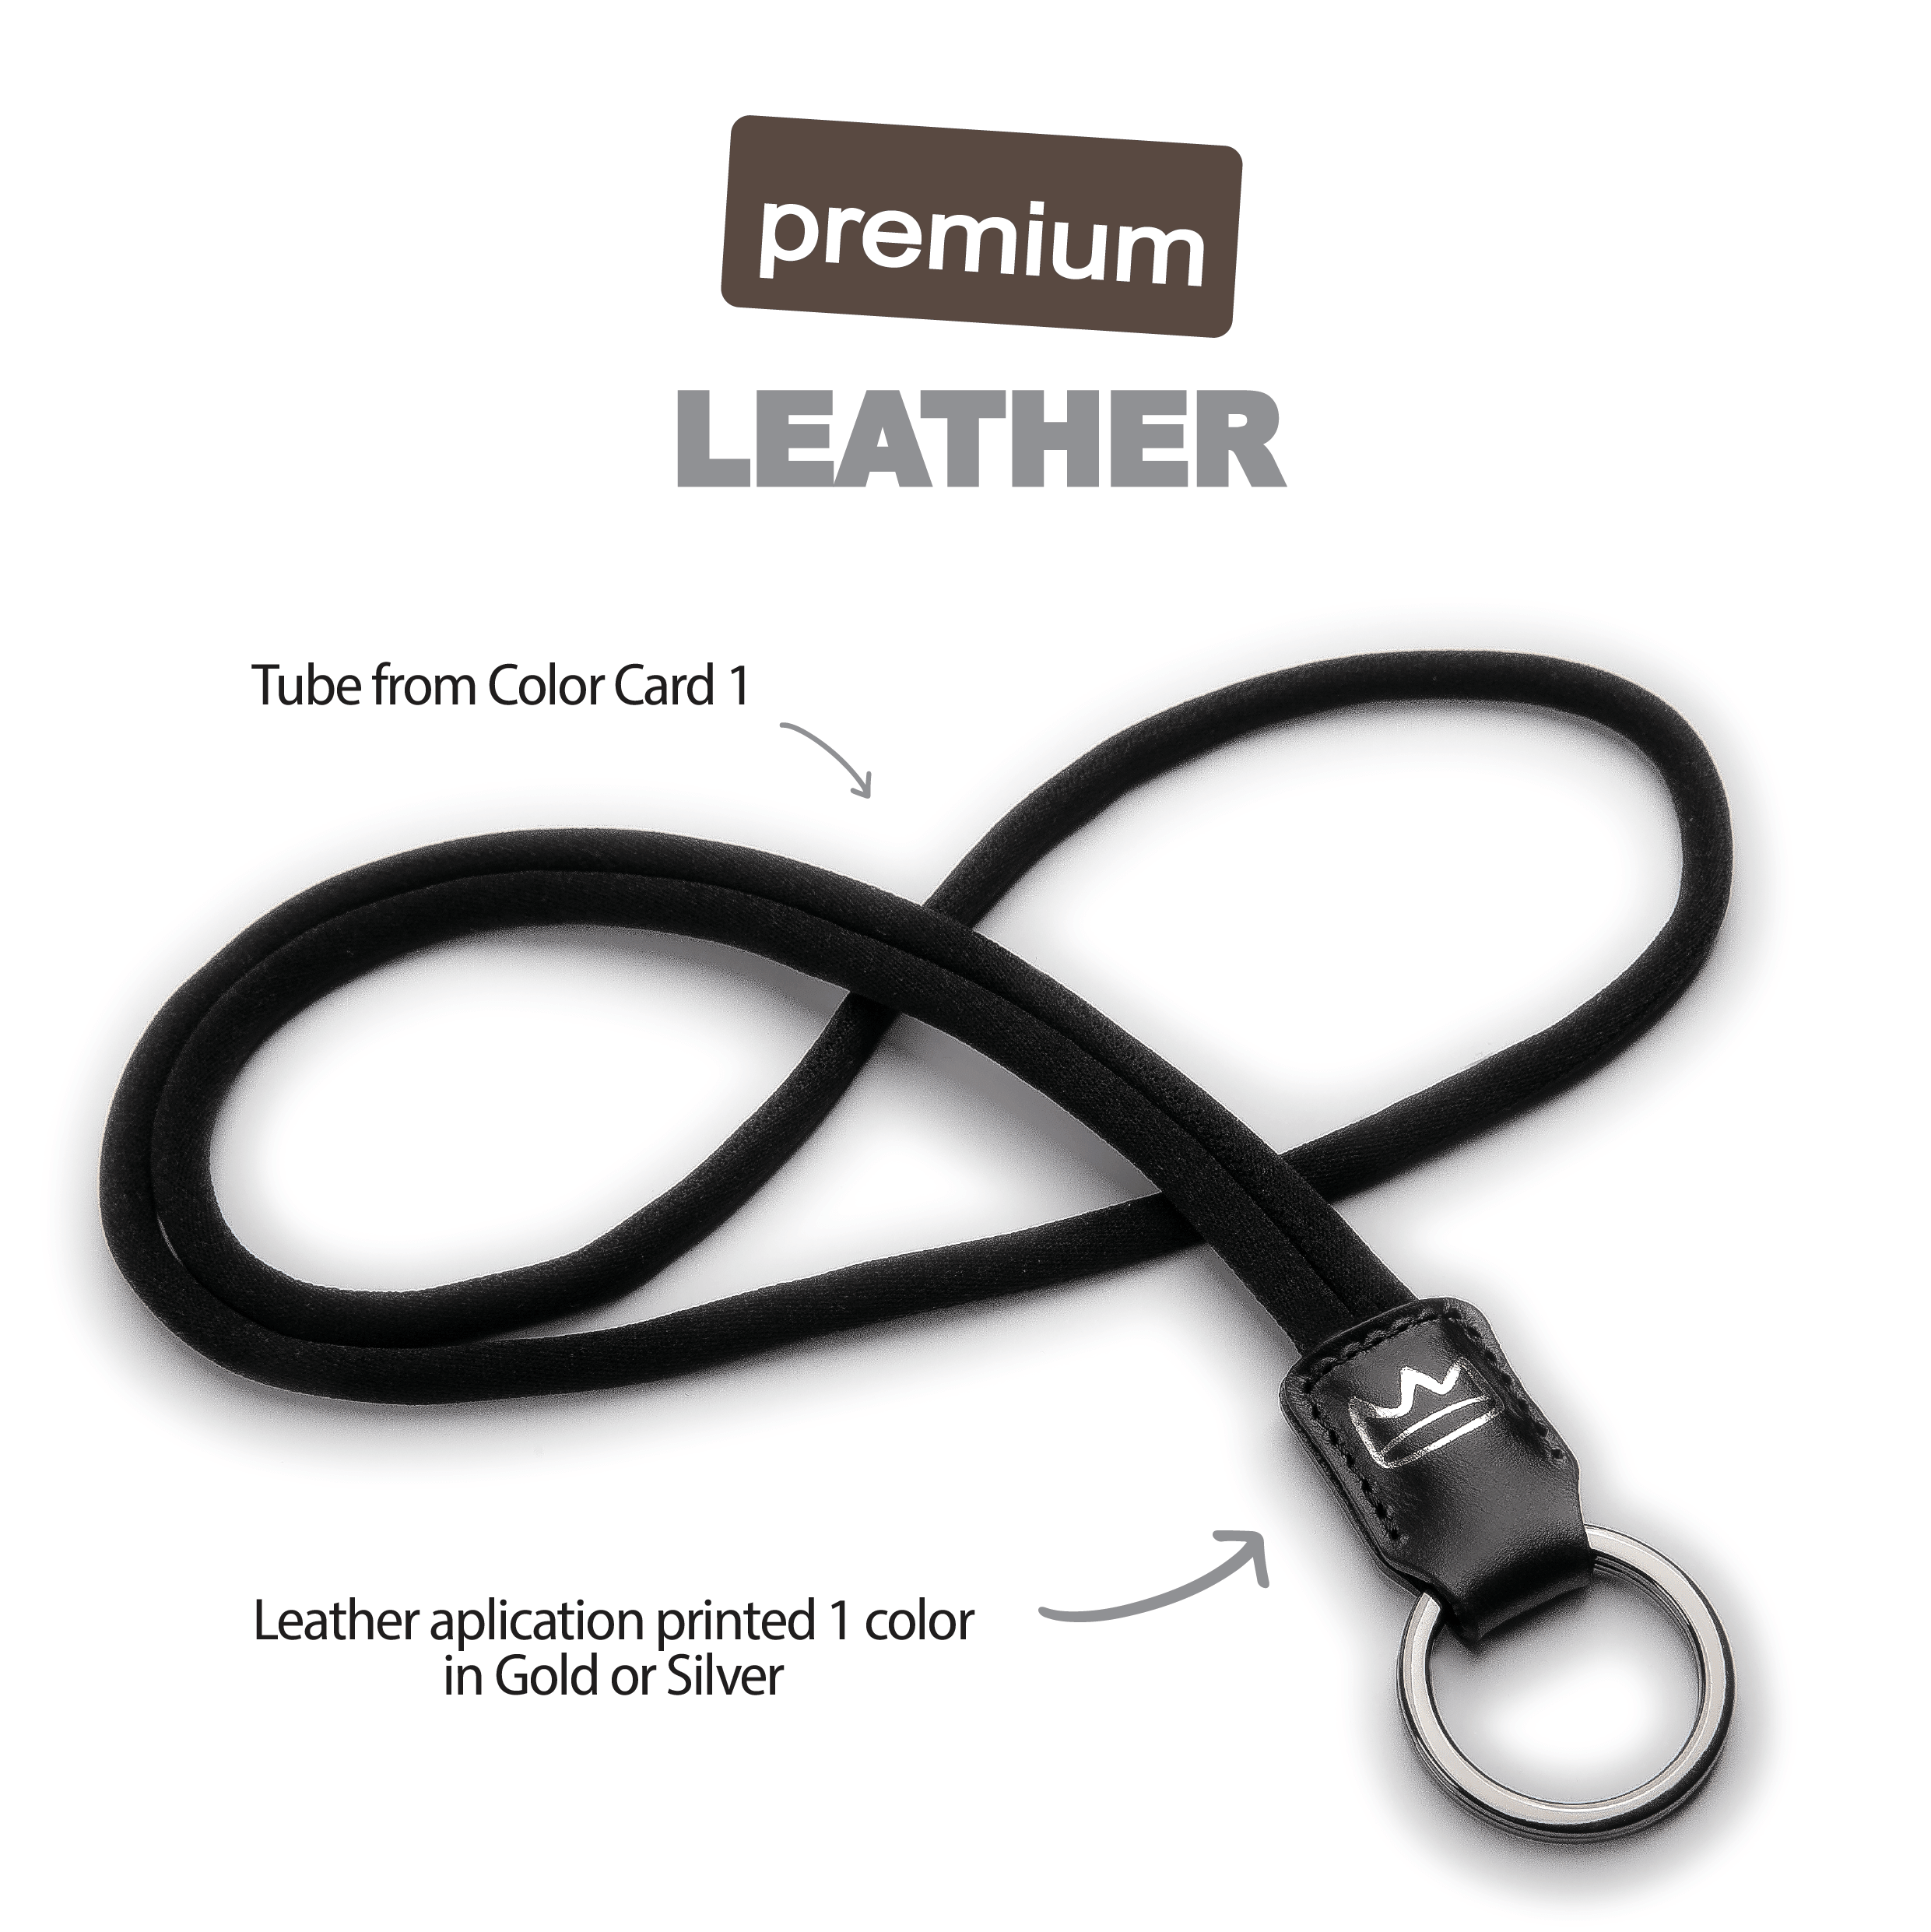 premiumleather_854143.png